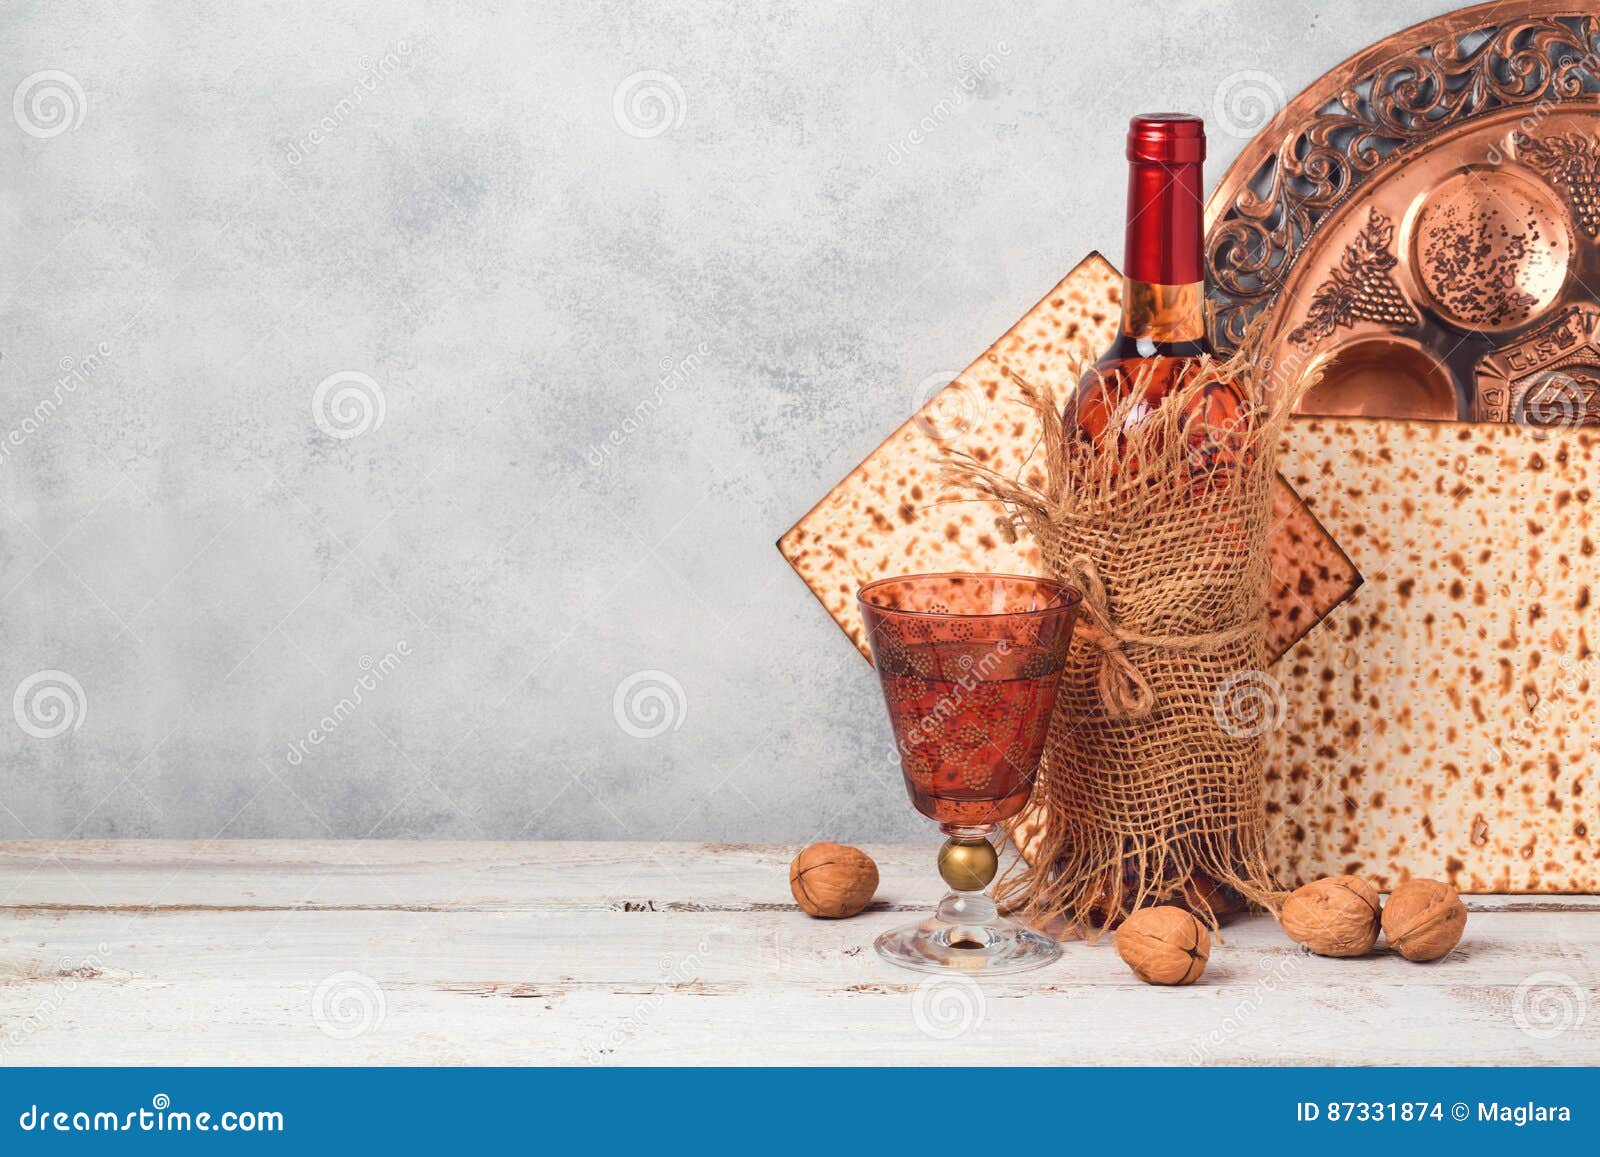 passover holiday concept with wine and matzoh over rustic background